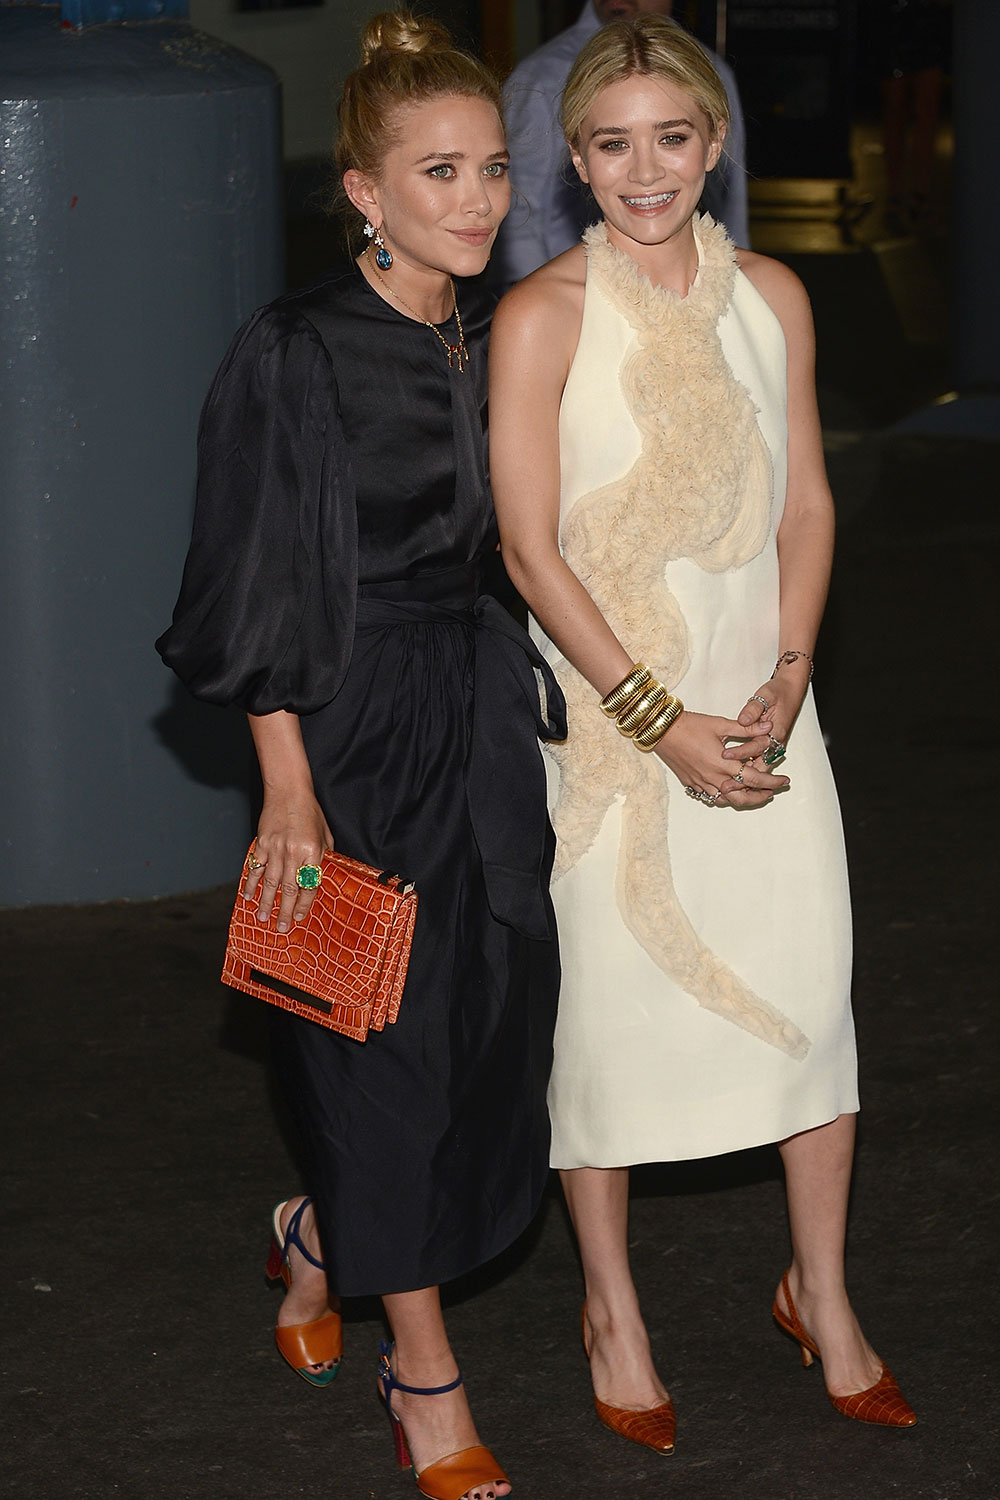 Mary-Kate and Ashley Olsen at the Fresh Air Fund Salute to American Heroes event in 2012